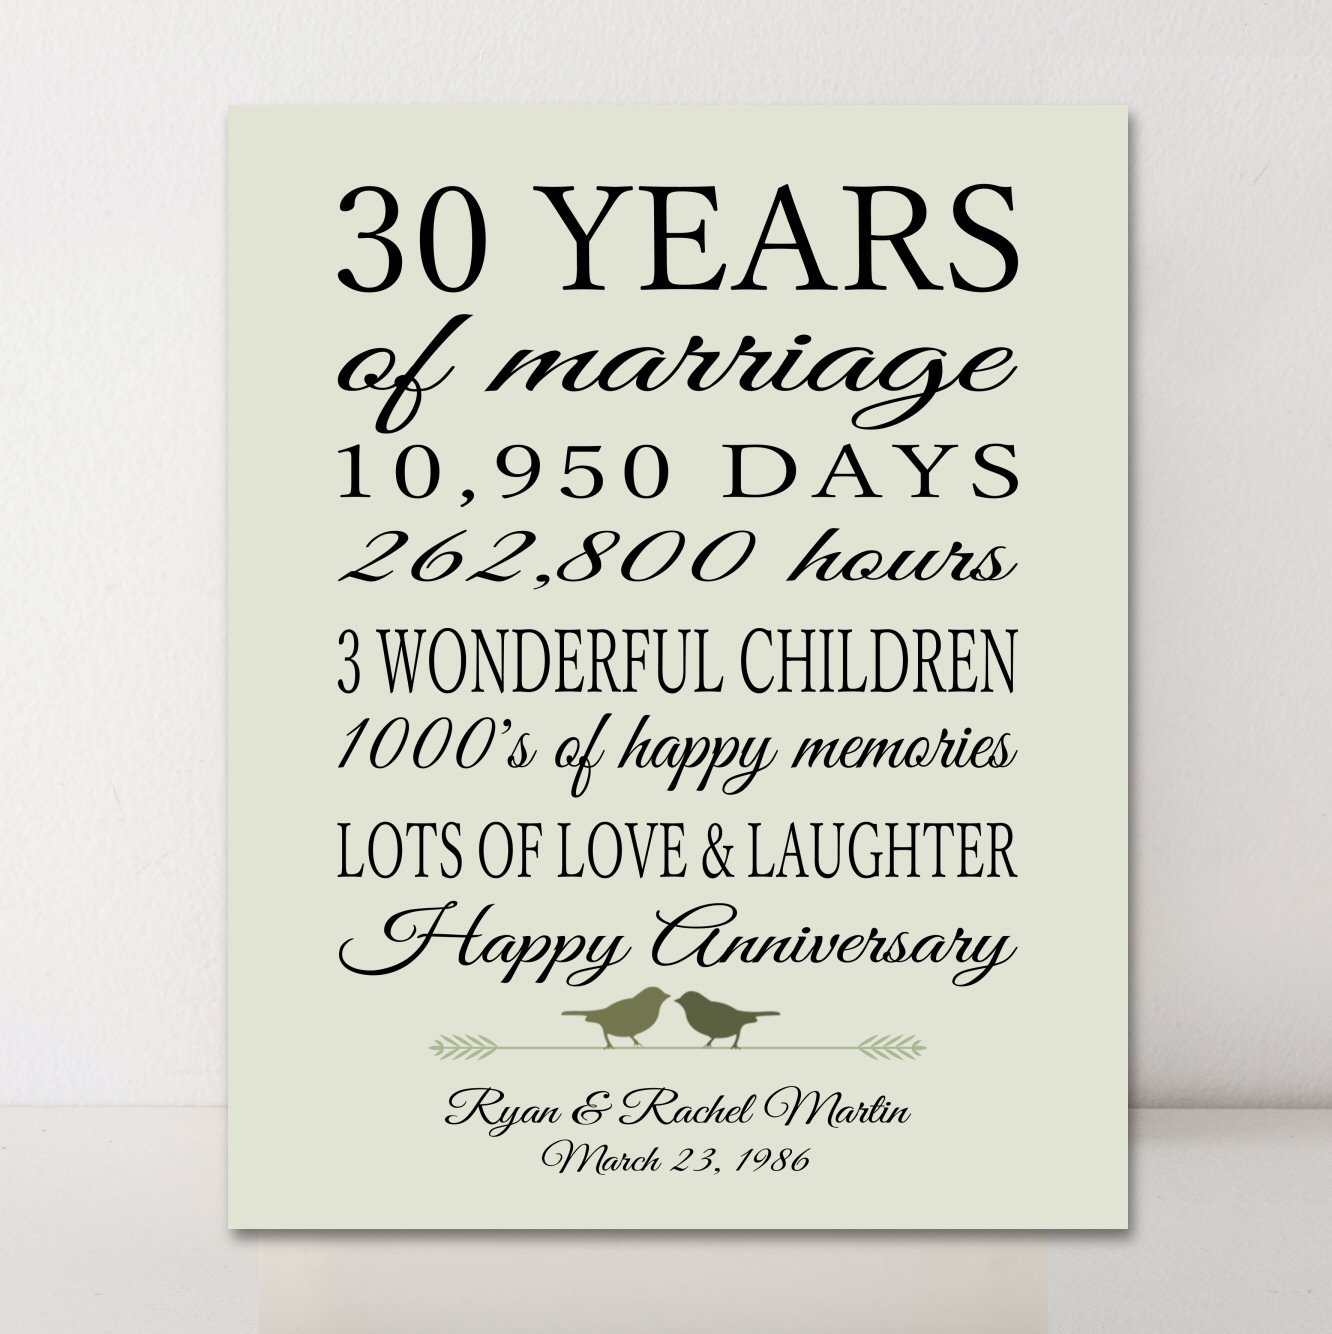 30 Yr Wedding Anniversary Gifts
 View Ideas For 30 Year Wedding Anniversary